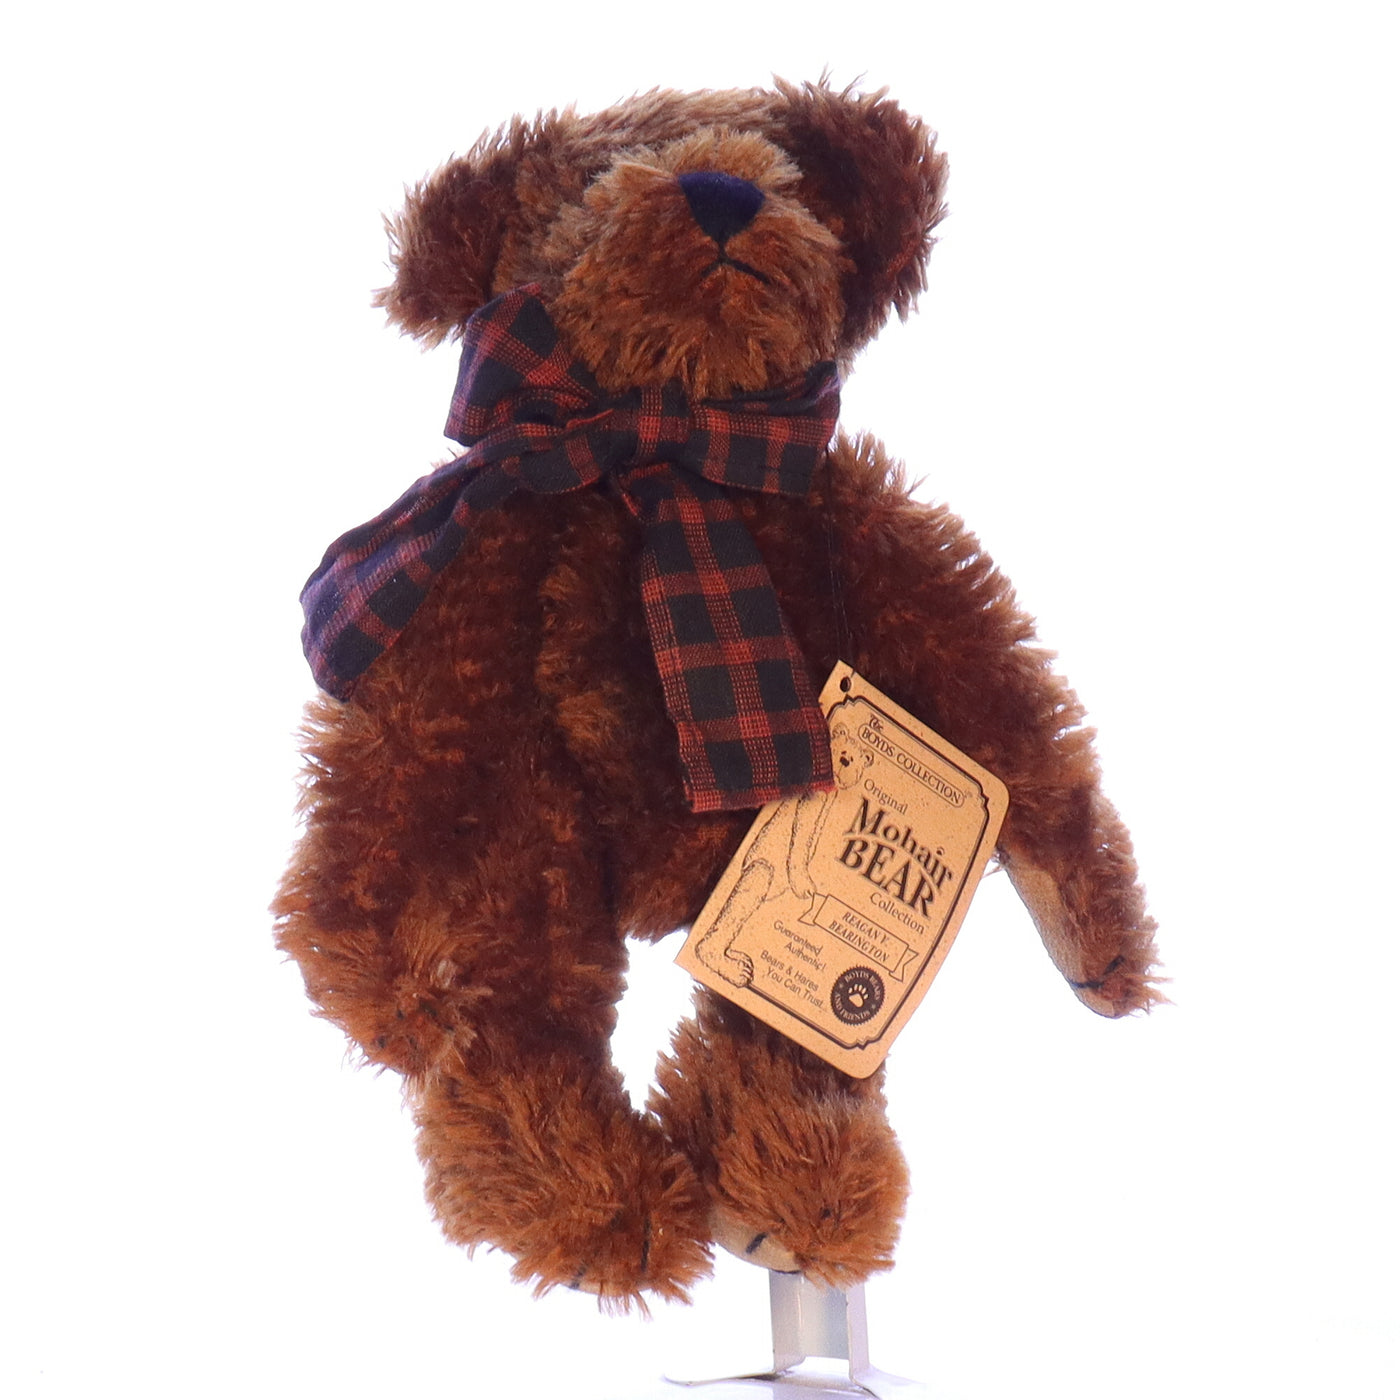 Boyds_Bears_and_Friends_590070-05_Reagan_V_Bearington_The_Original_Mohair_Bear_Collection_Stuffed_Animal_1997 Front View